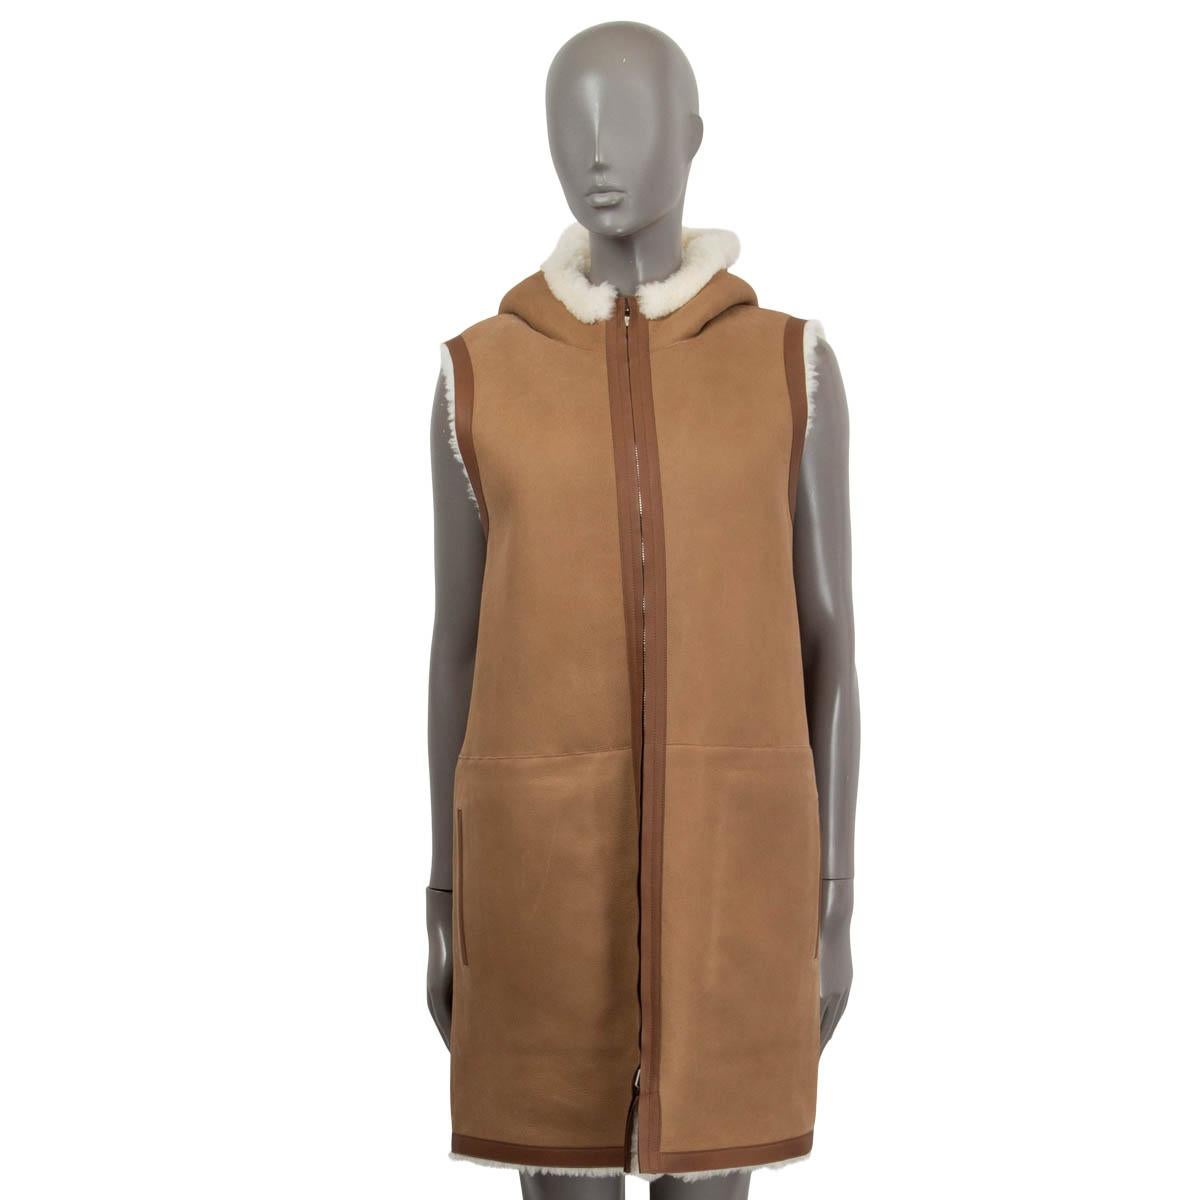 100% authentic Loro Piana 'Henry' reversible hooded shearling vest in pale camel and off-white dyed lamb fur (100%). Features two flap patch pockets on the shearling side and two slit pockets on the leather side. Opens with a double zipper on the